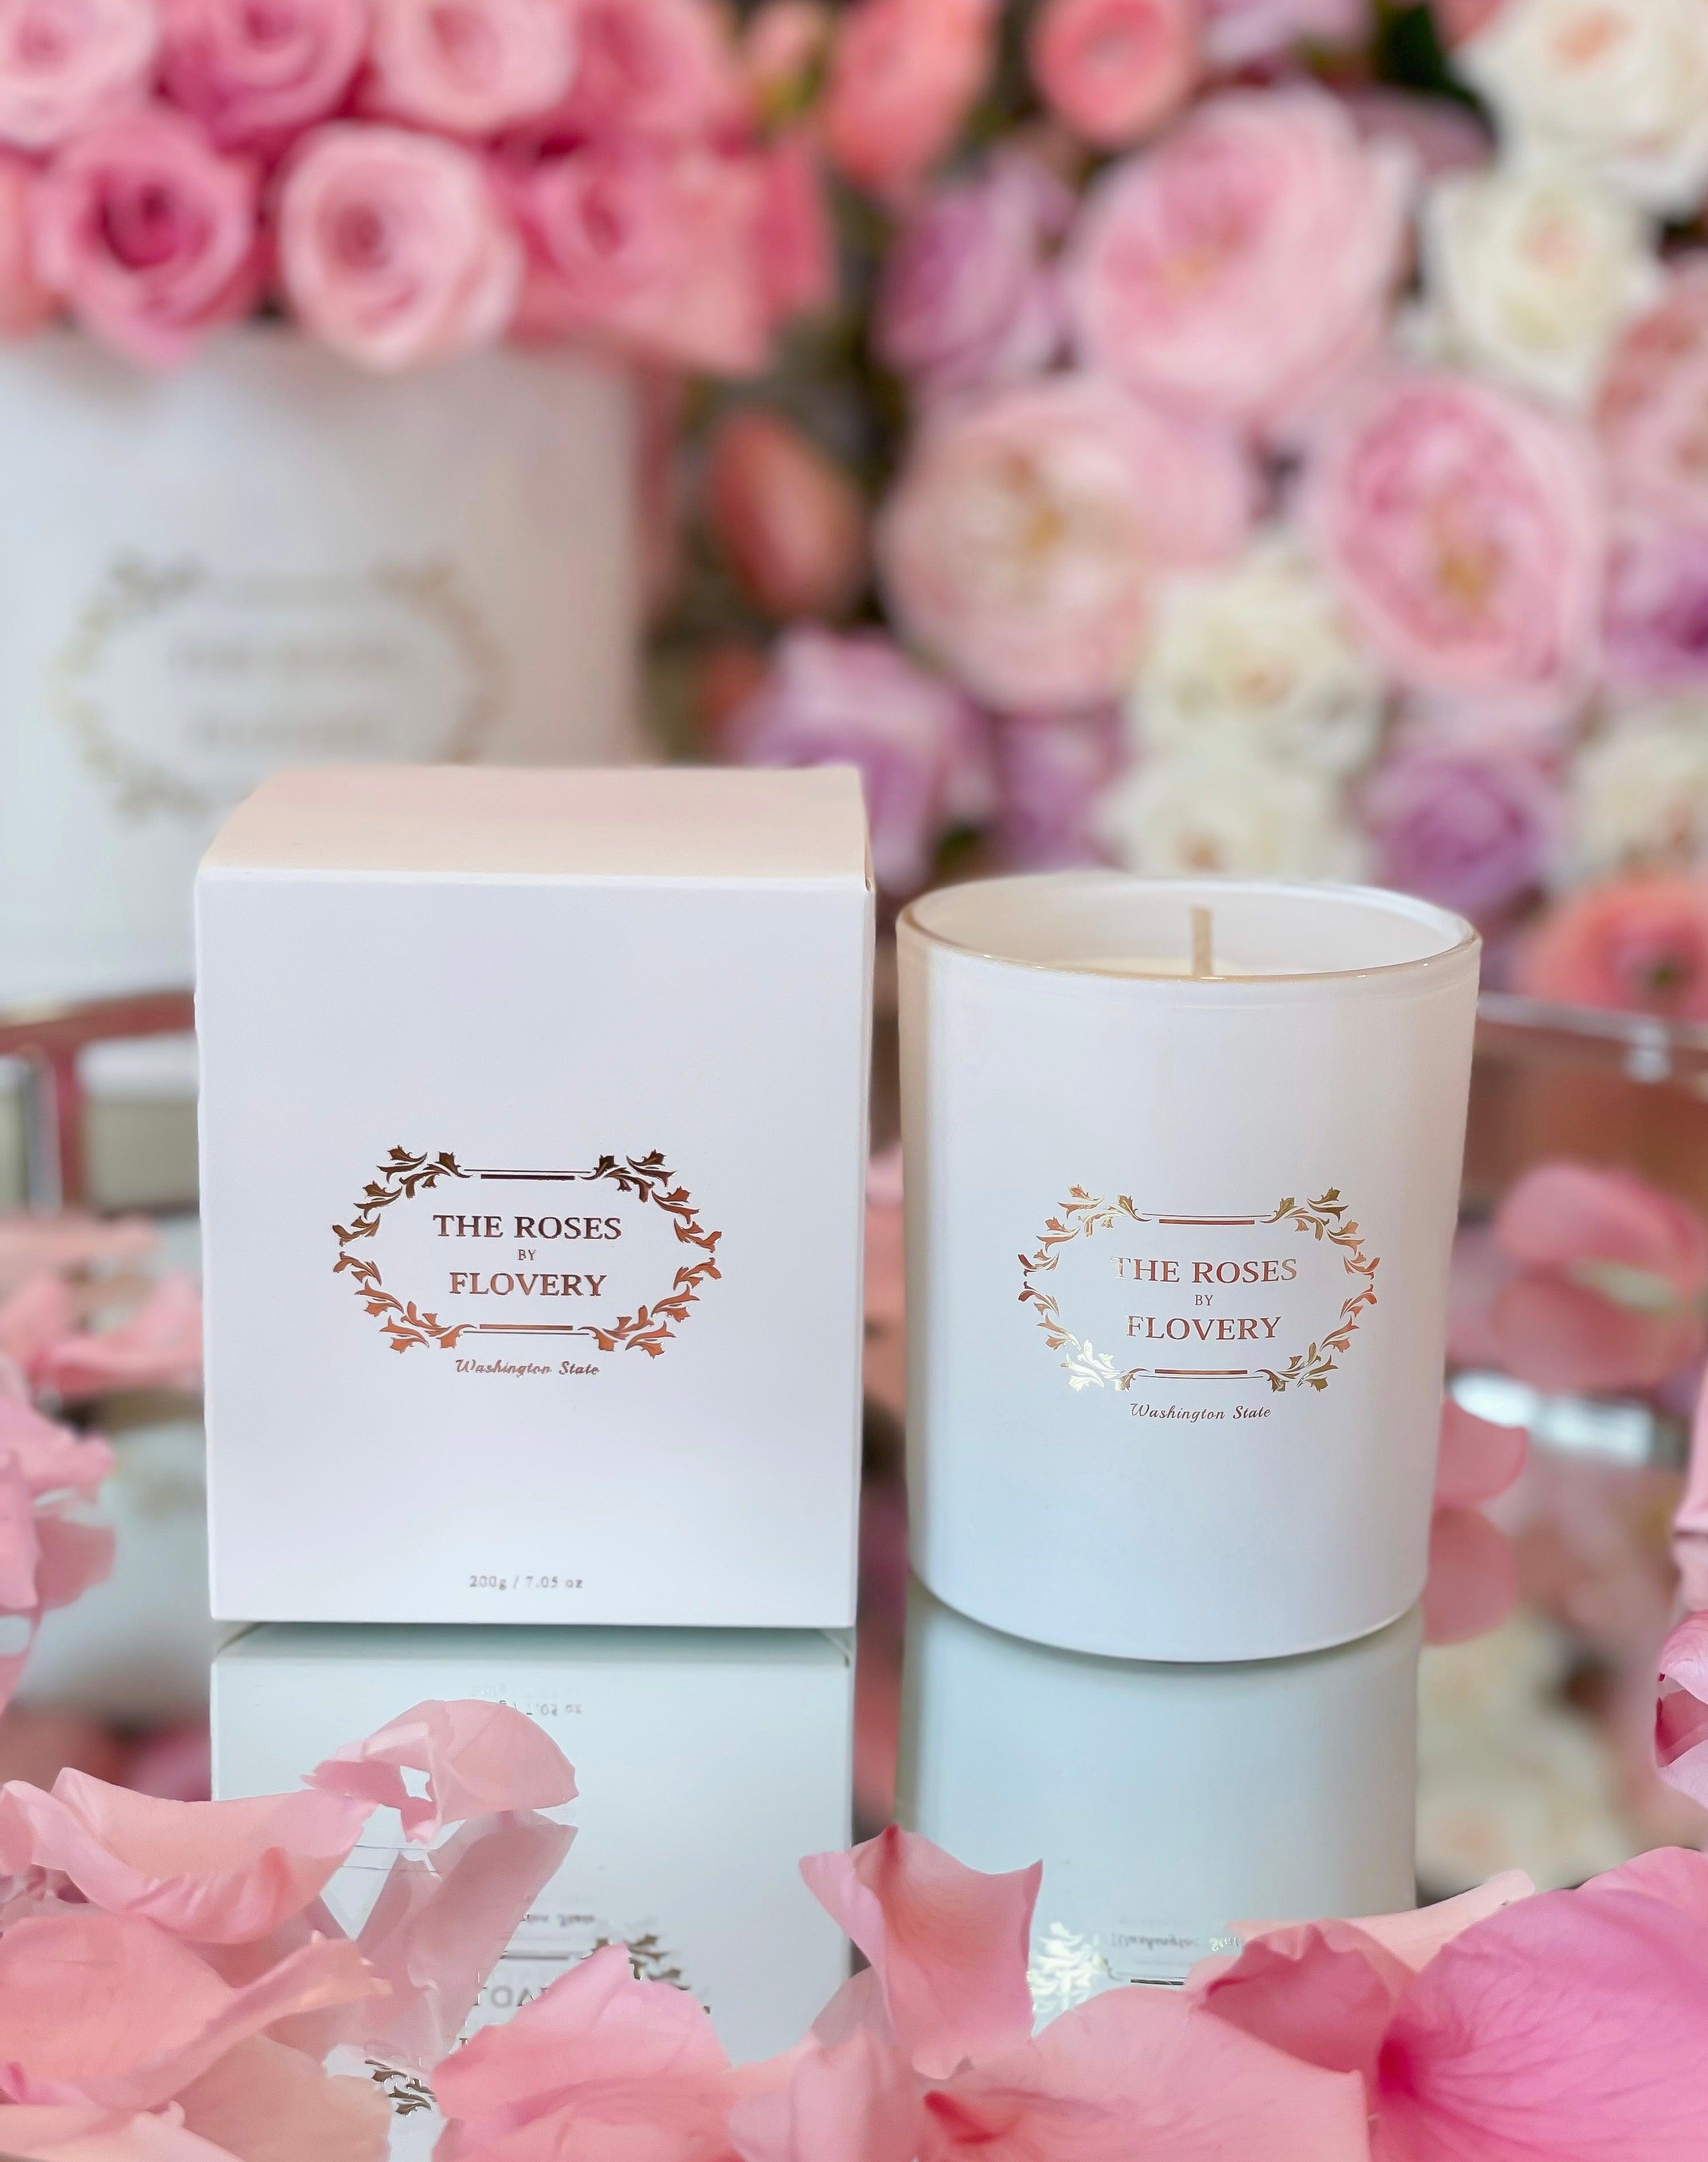 Flovery’s Signature Candle - Flovery